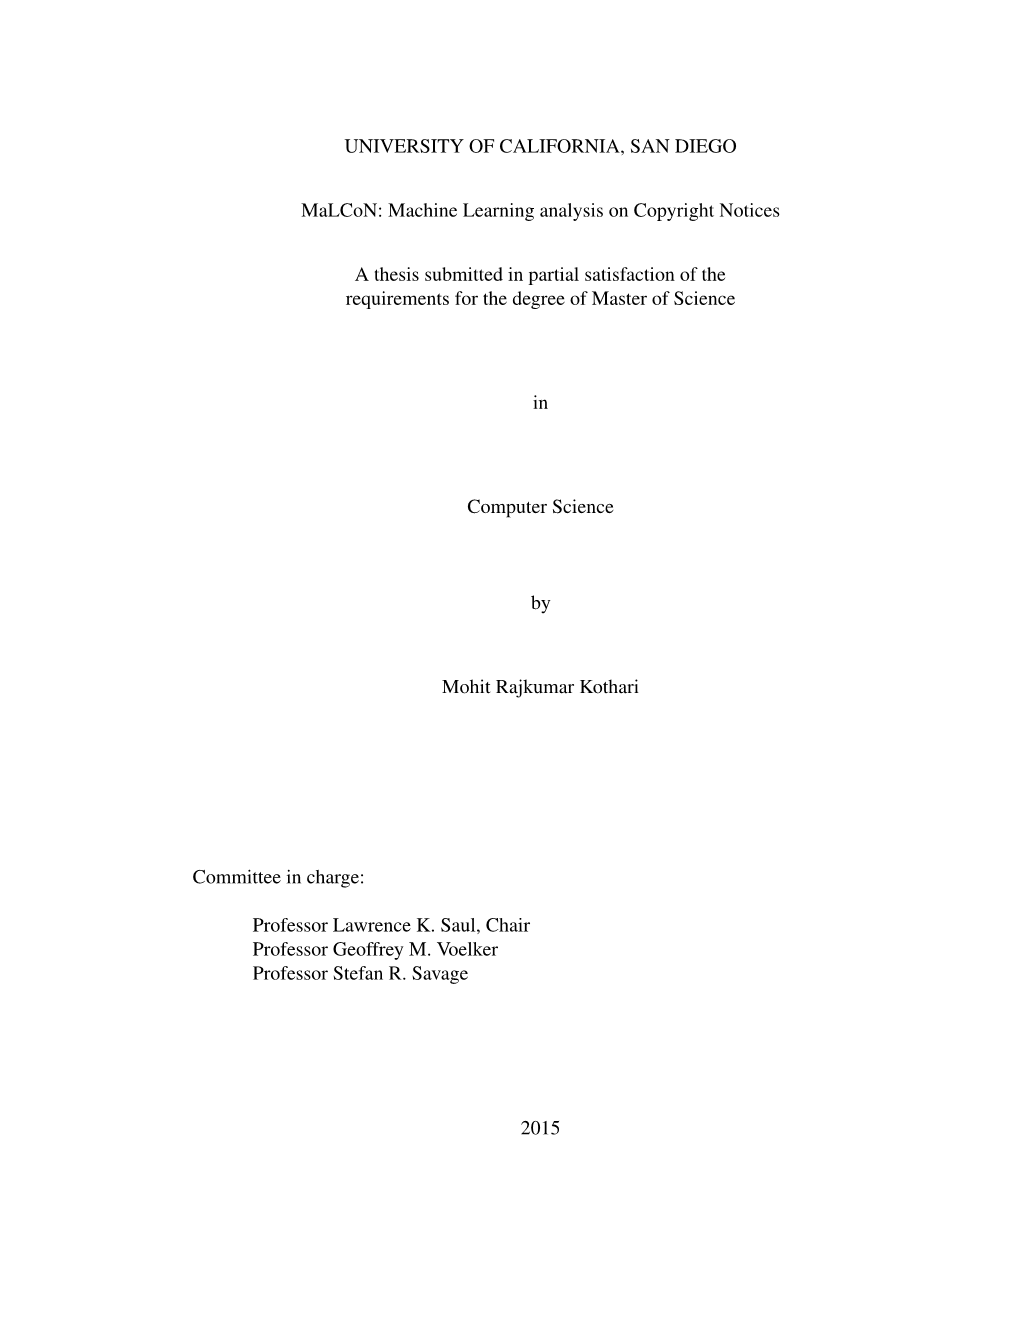 Machine Learning Analysis on Copyright Notices a Thesis Submitted in Partial Satisfa